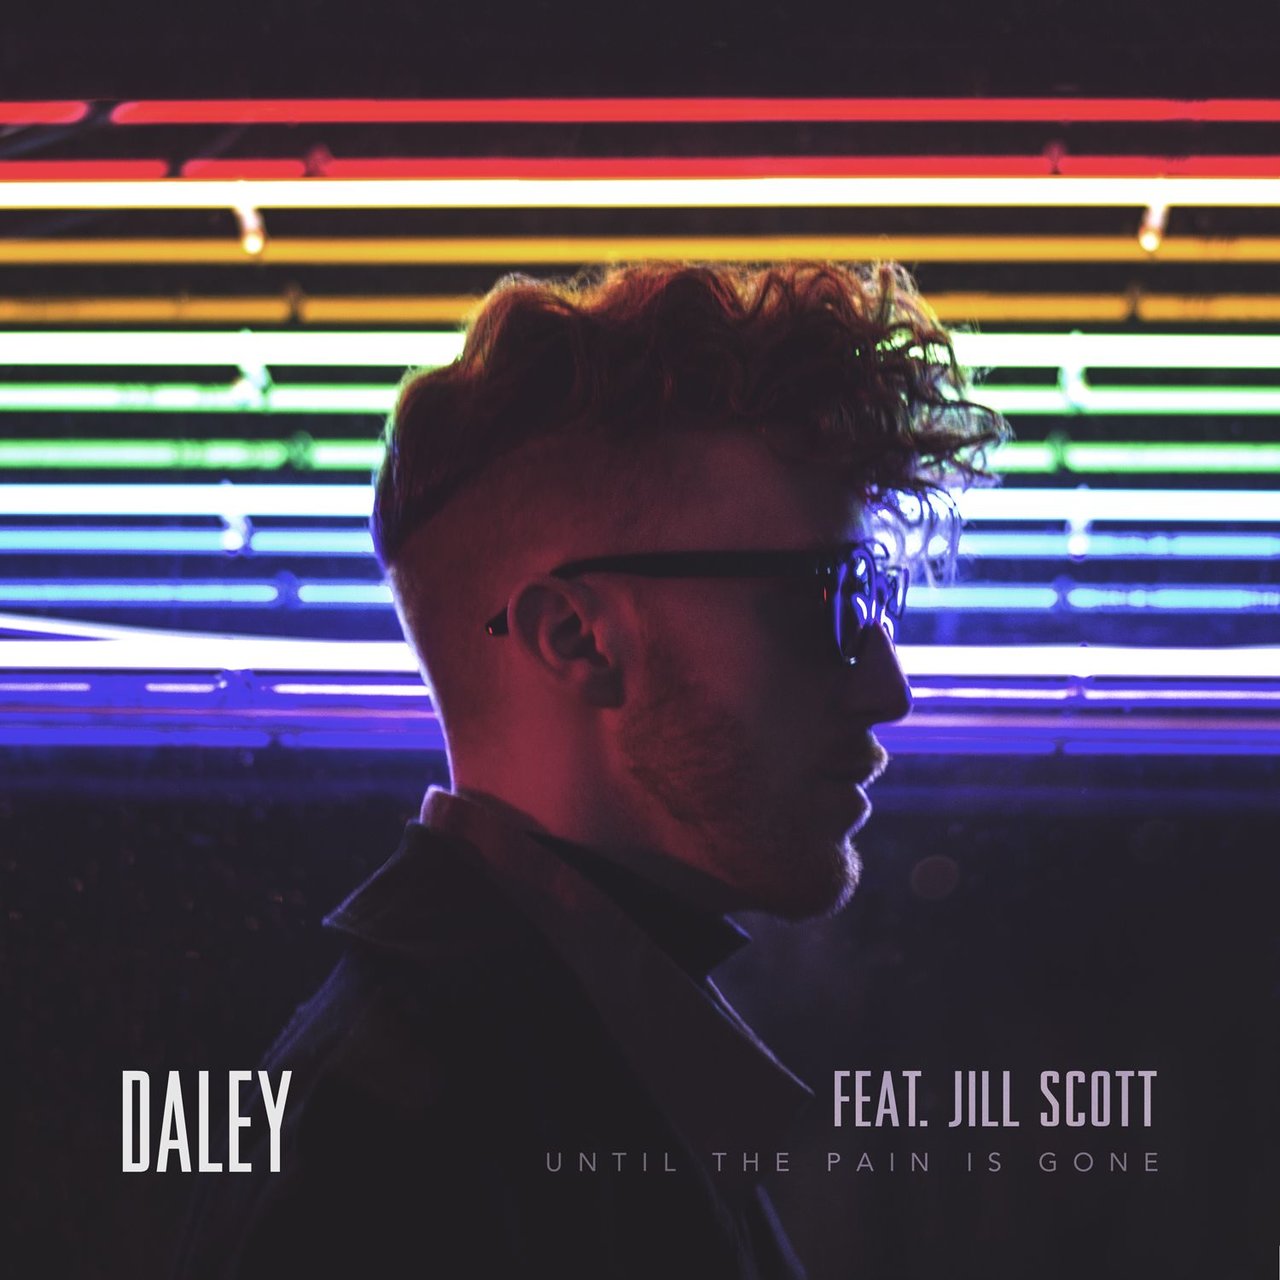 [New Music] Daley – “Until The Pain Is Gone” feat. Jill Scott